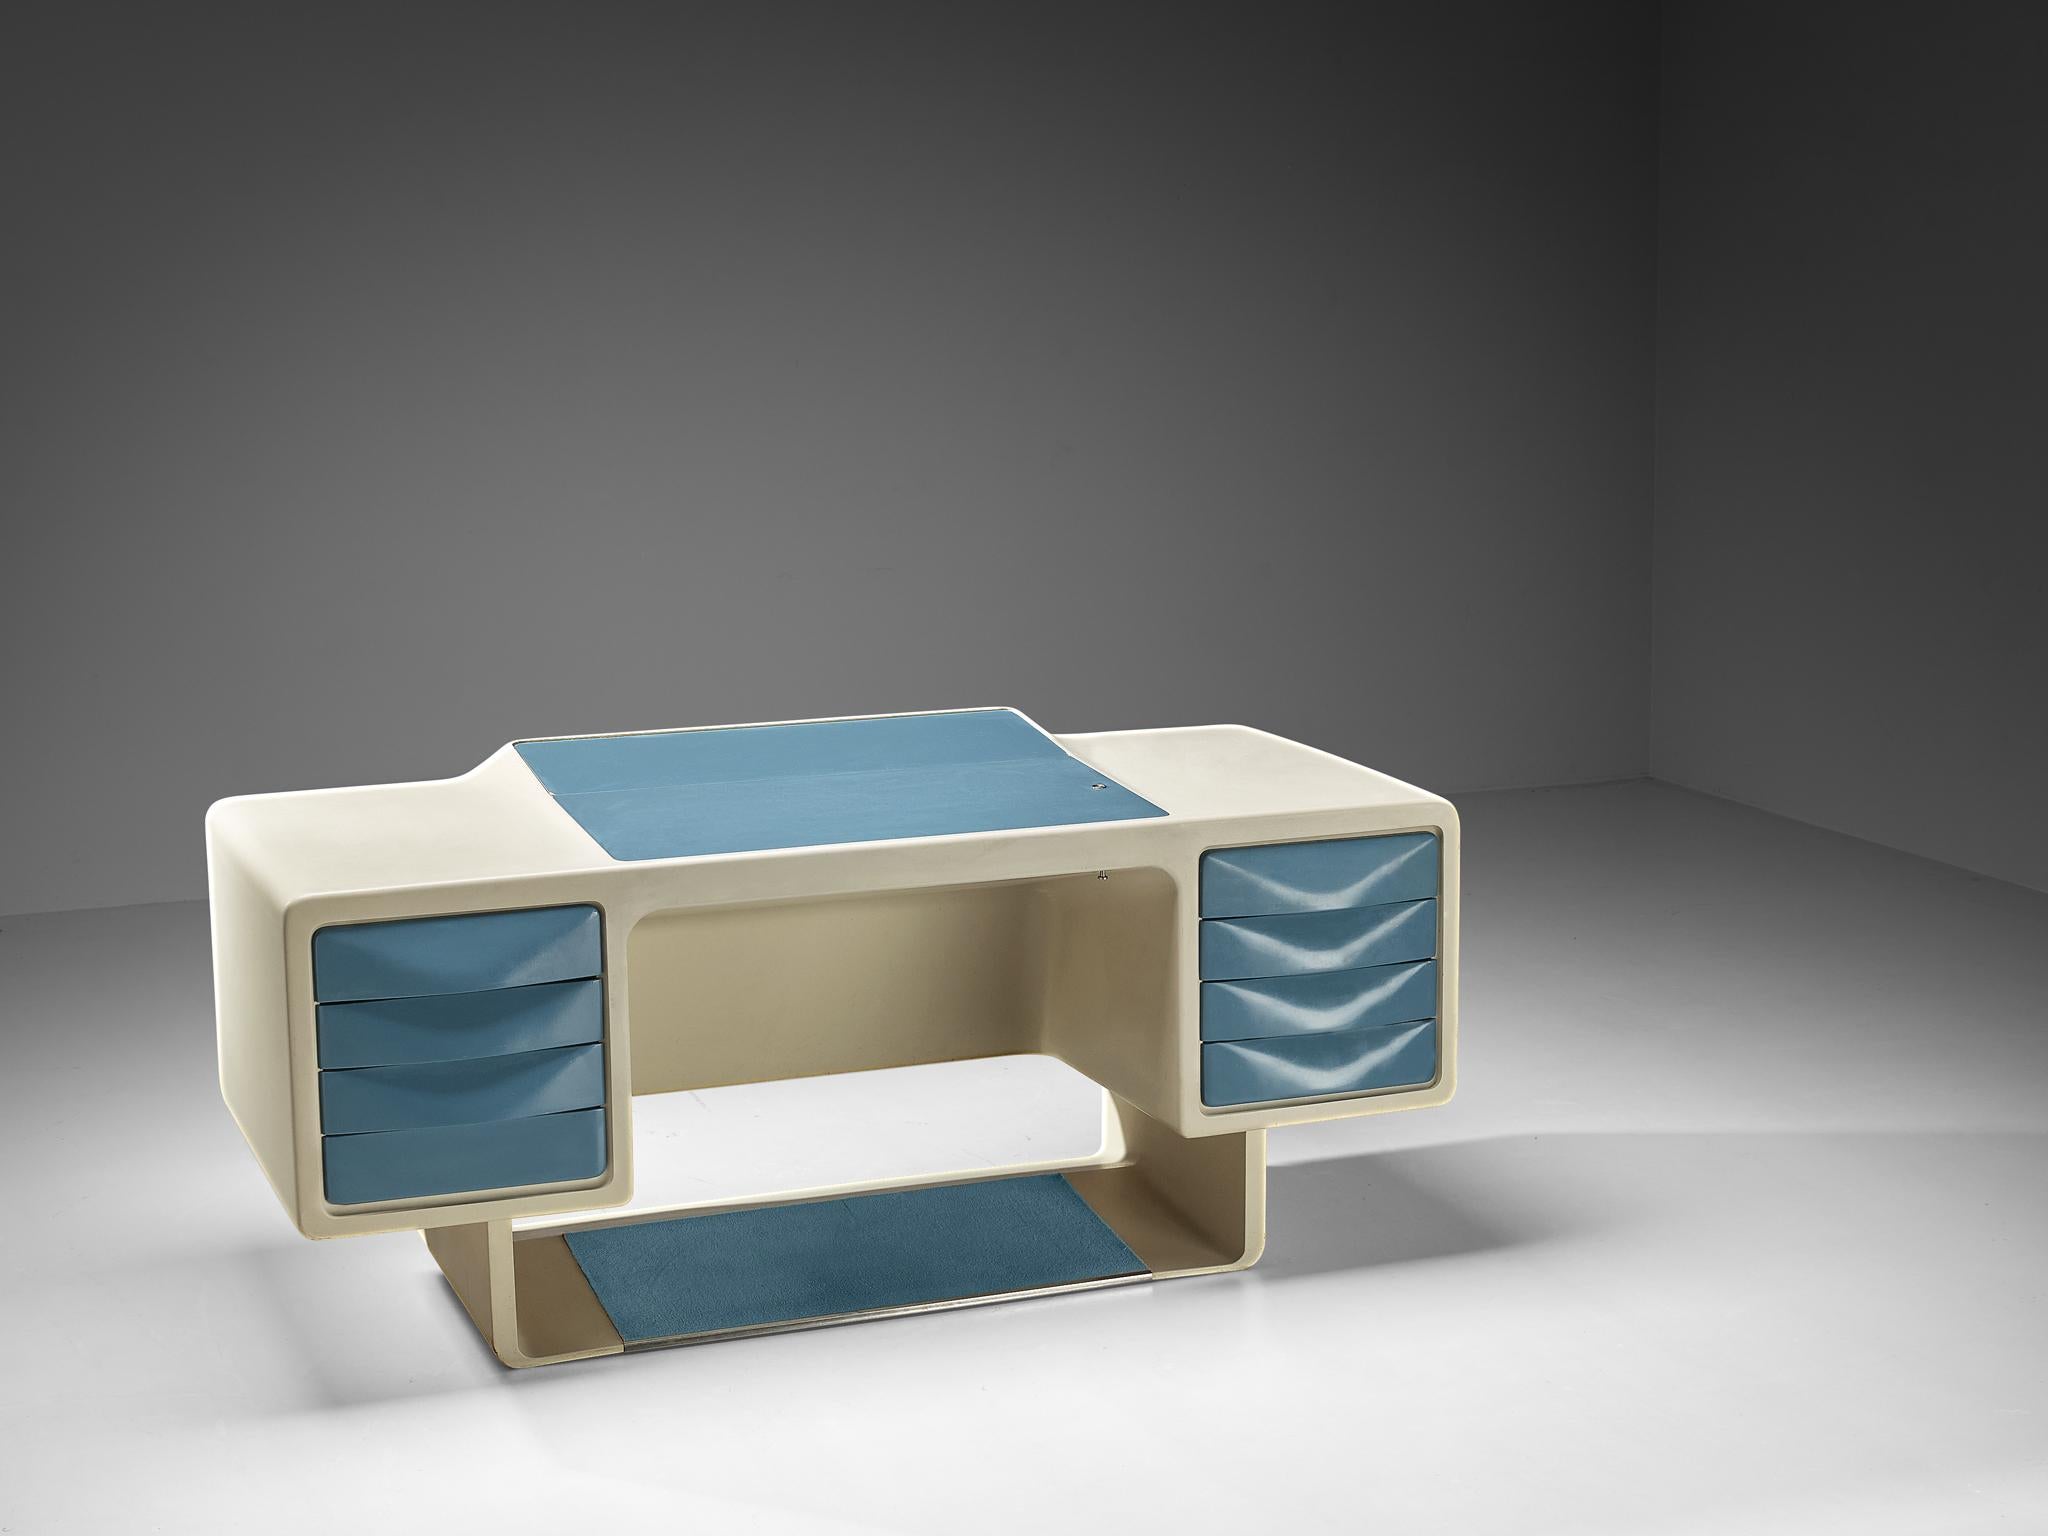 Ernest Igl for Wilhelm Werndl, Directors writing desk, fiberglass, Germany, 1970s 

This design truly resembles the ethos of the seventies – a bright and bold era – featuring the commonly used material of that time named fiberglass. Ernest Igl